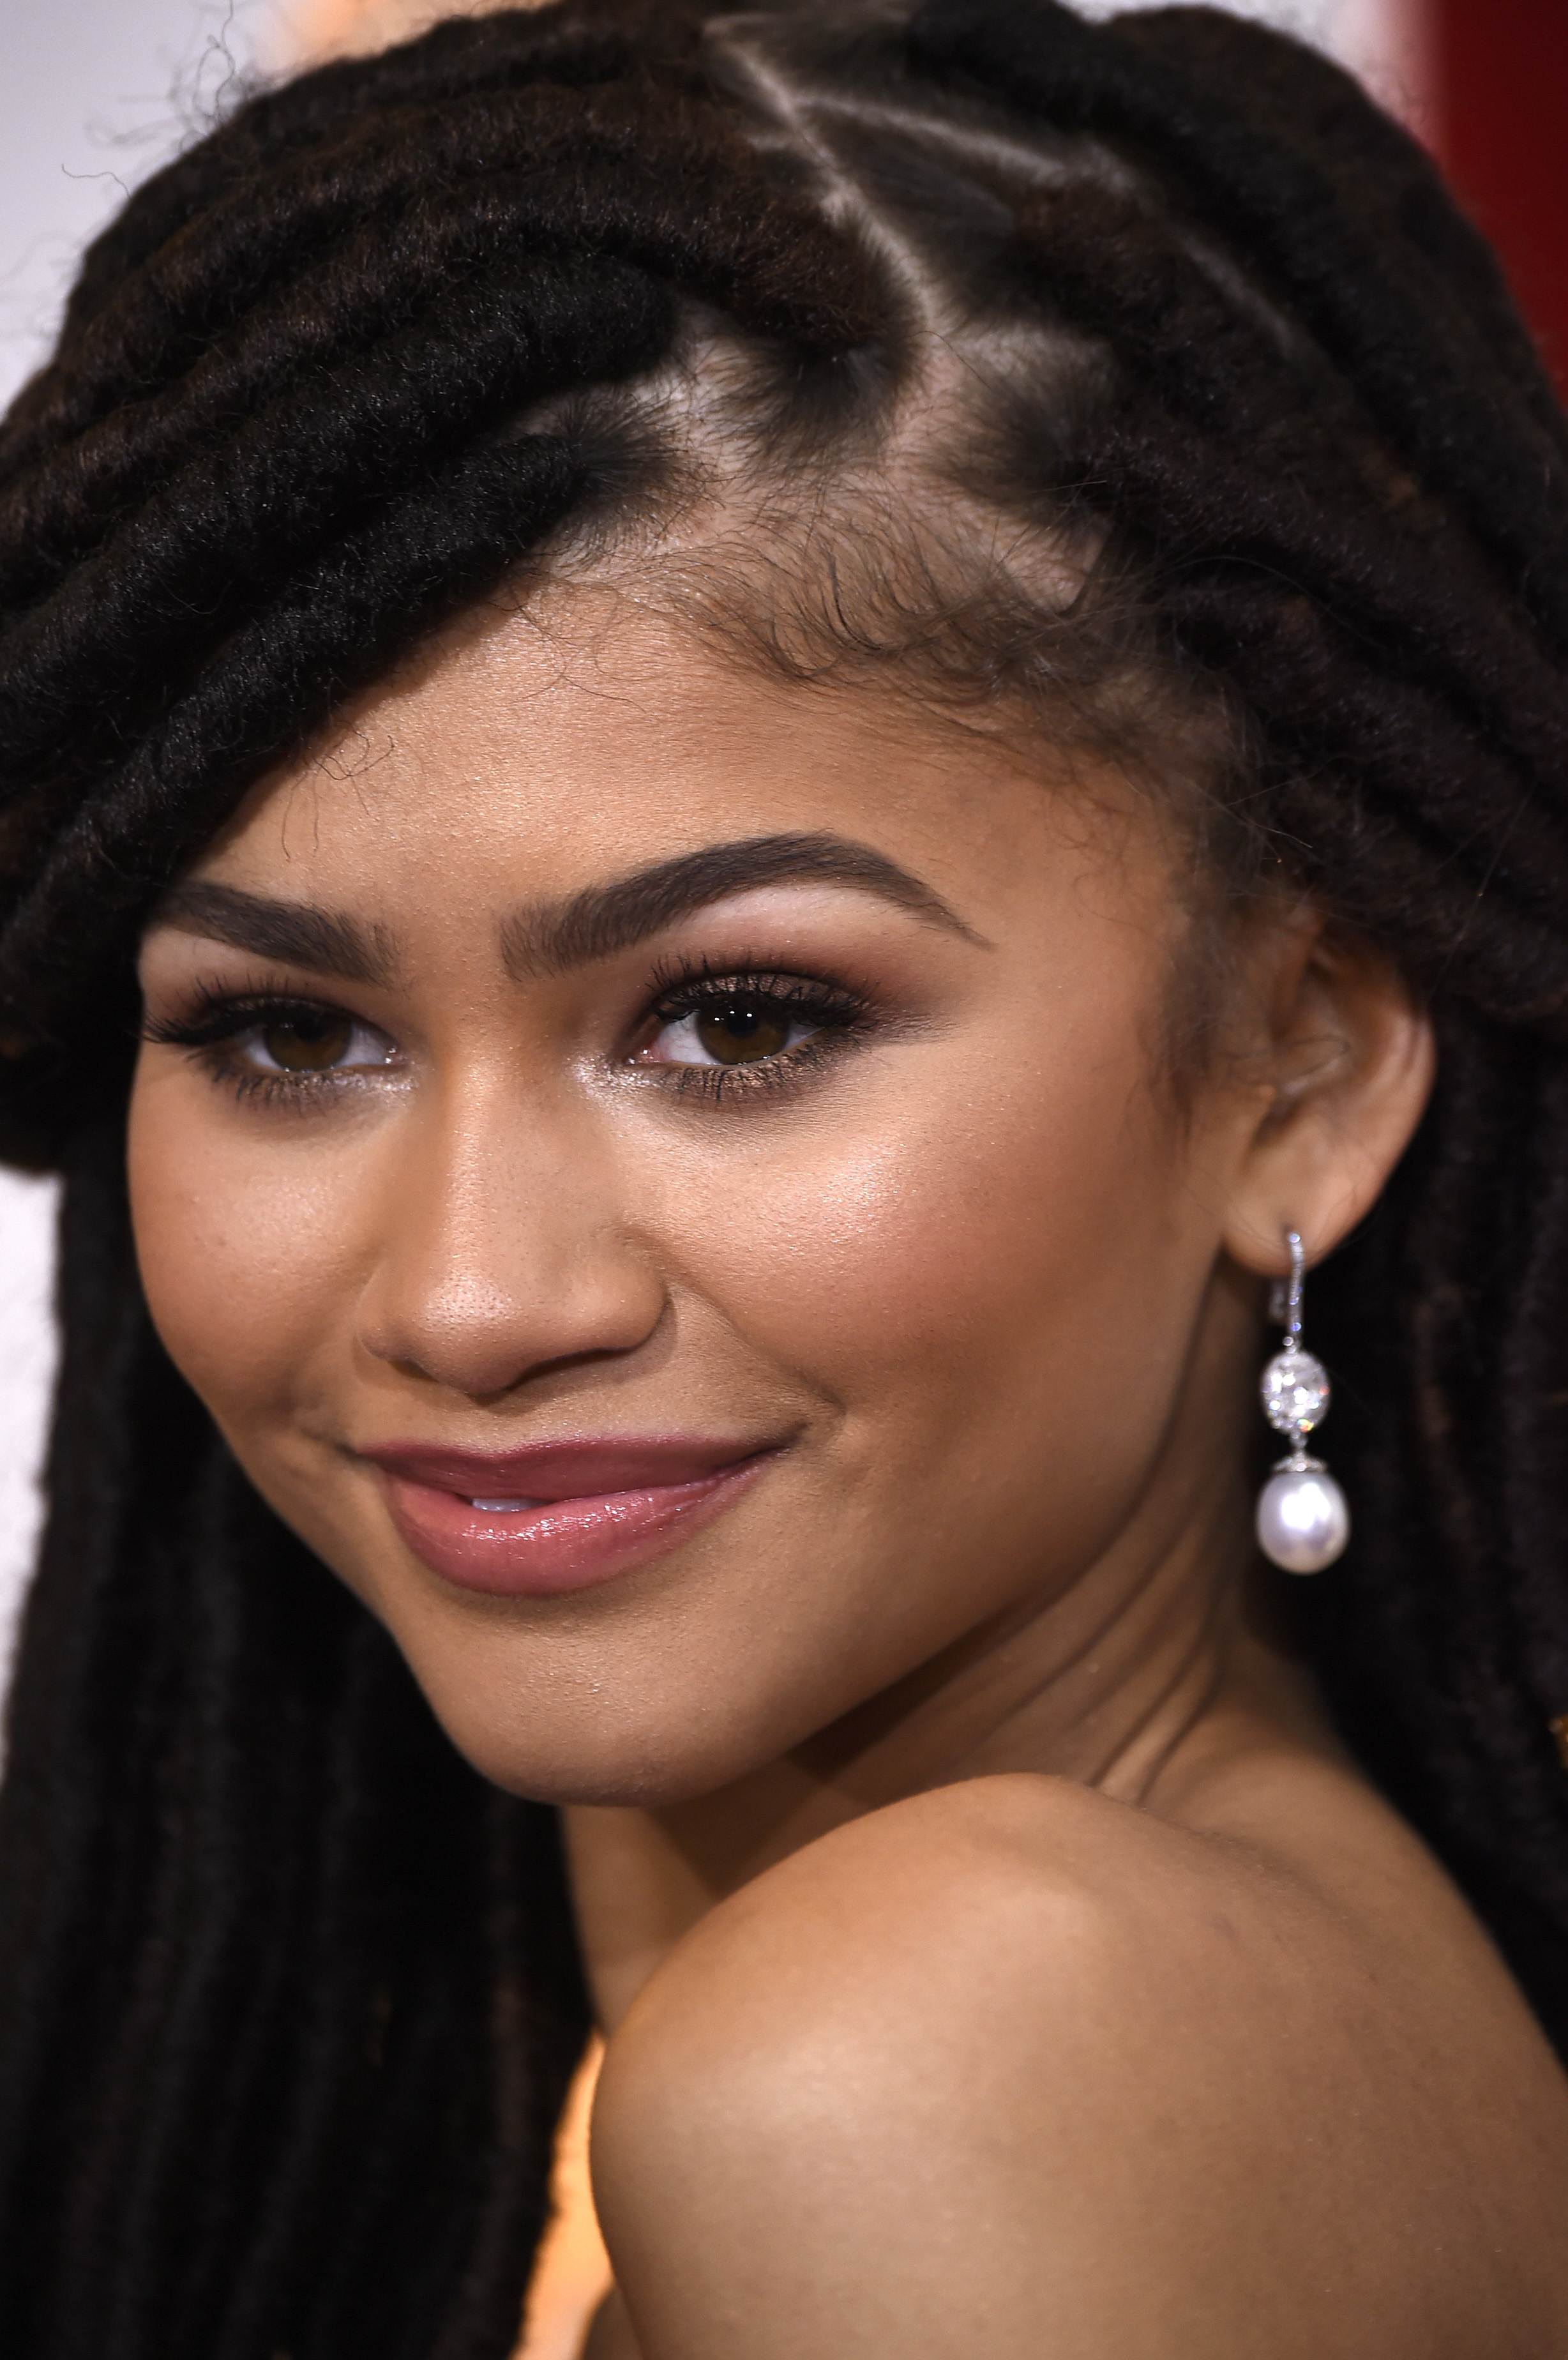 Zendaya arrives in Chopard to the 87th Annual Academy Awards at Hollywood & Highland Center in Hollywood, California, on February 22, 2015. | Source: Getty Images